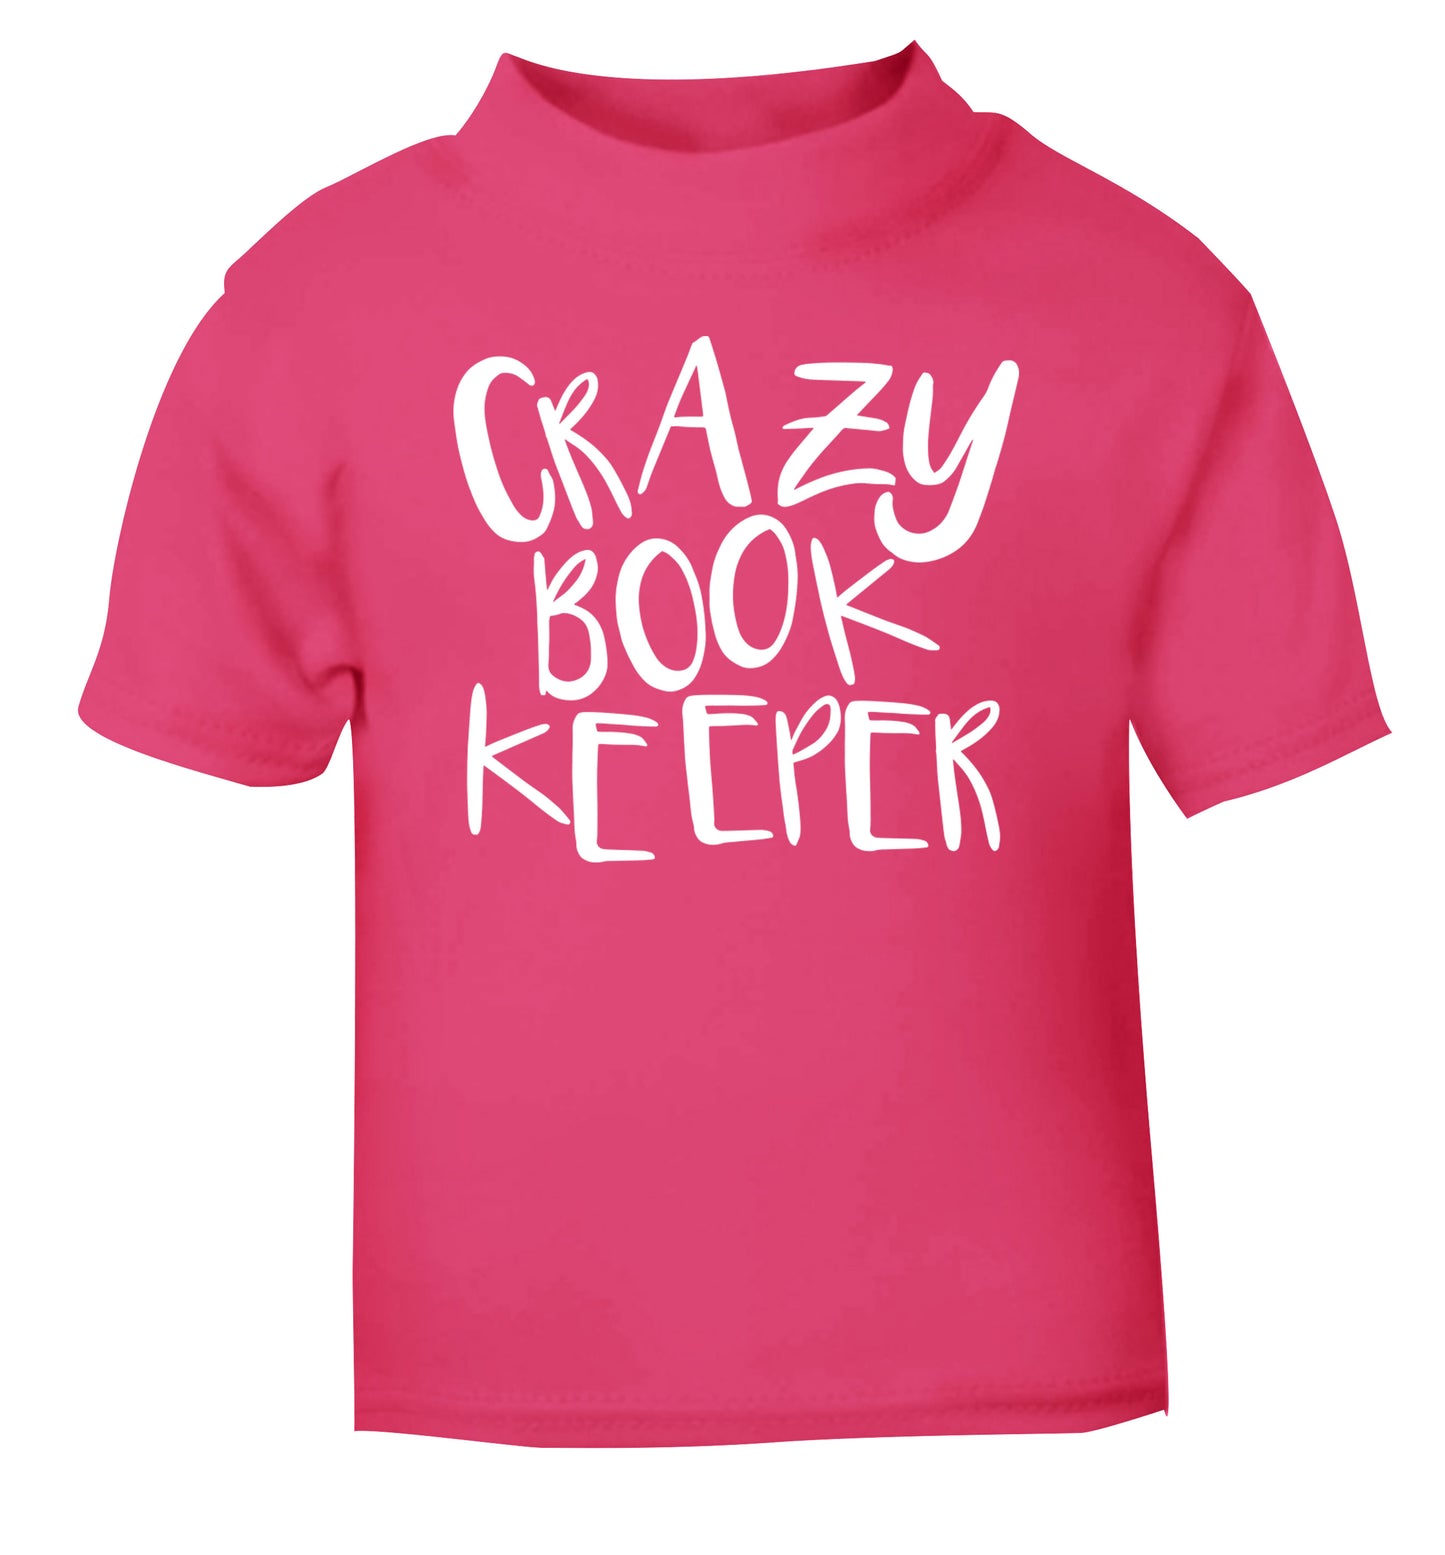 Crazy bookkeeper pink Baby Toddler Tshirt 2 Years